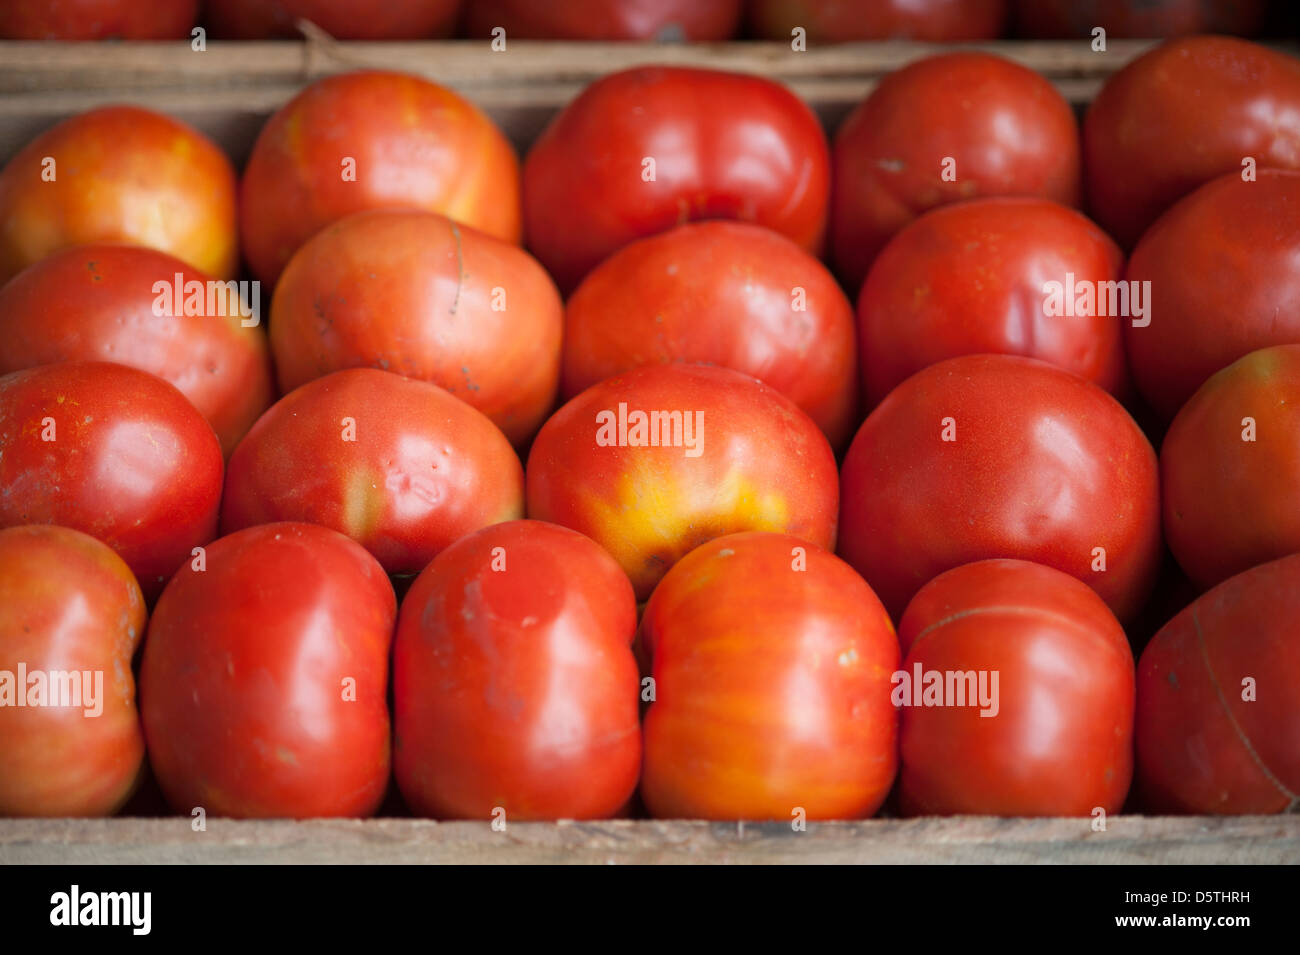 Tomatoes at Lo Valledor central wholesale produce market in Santiago, Chile Stock Photo